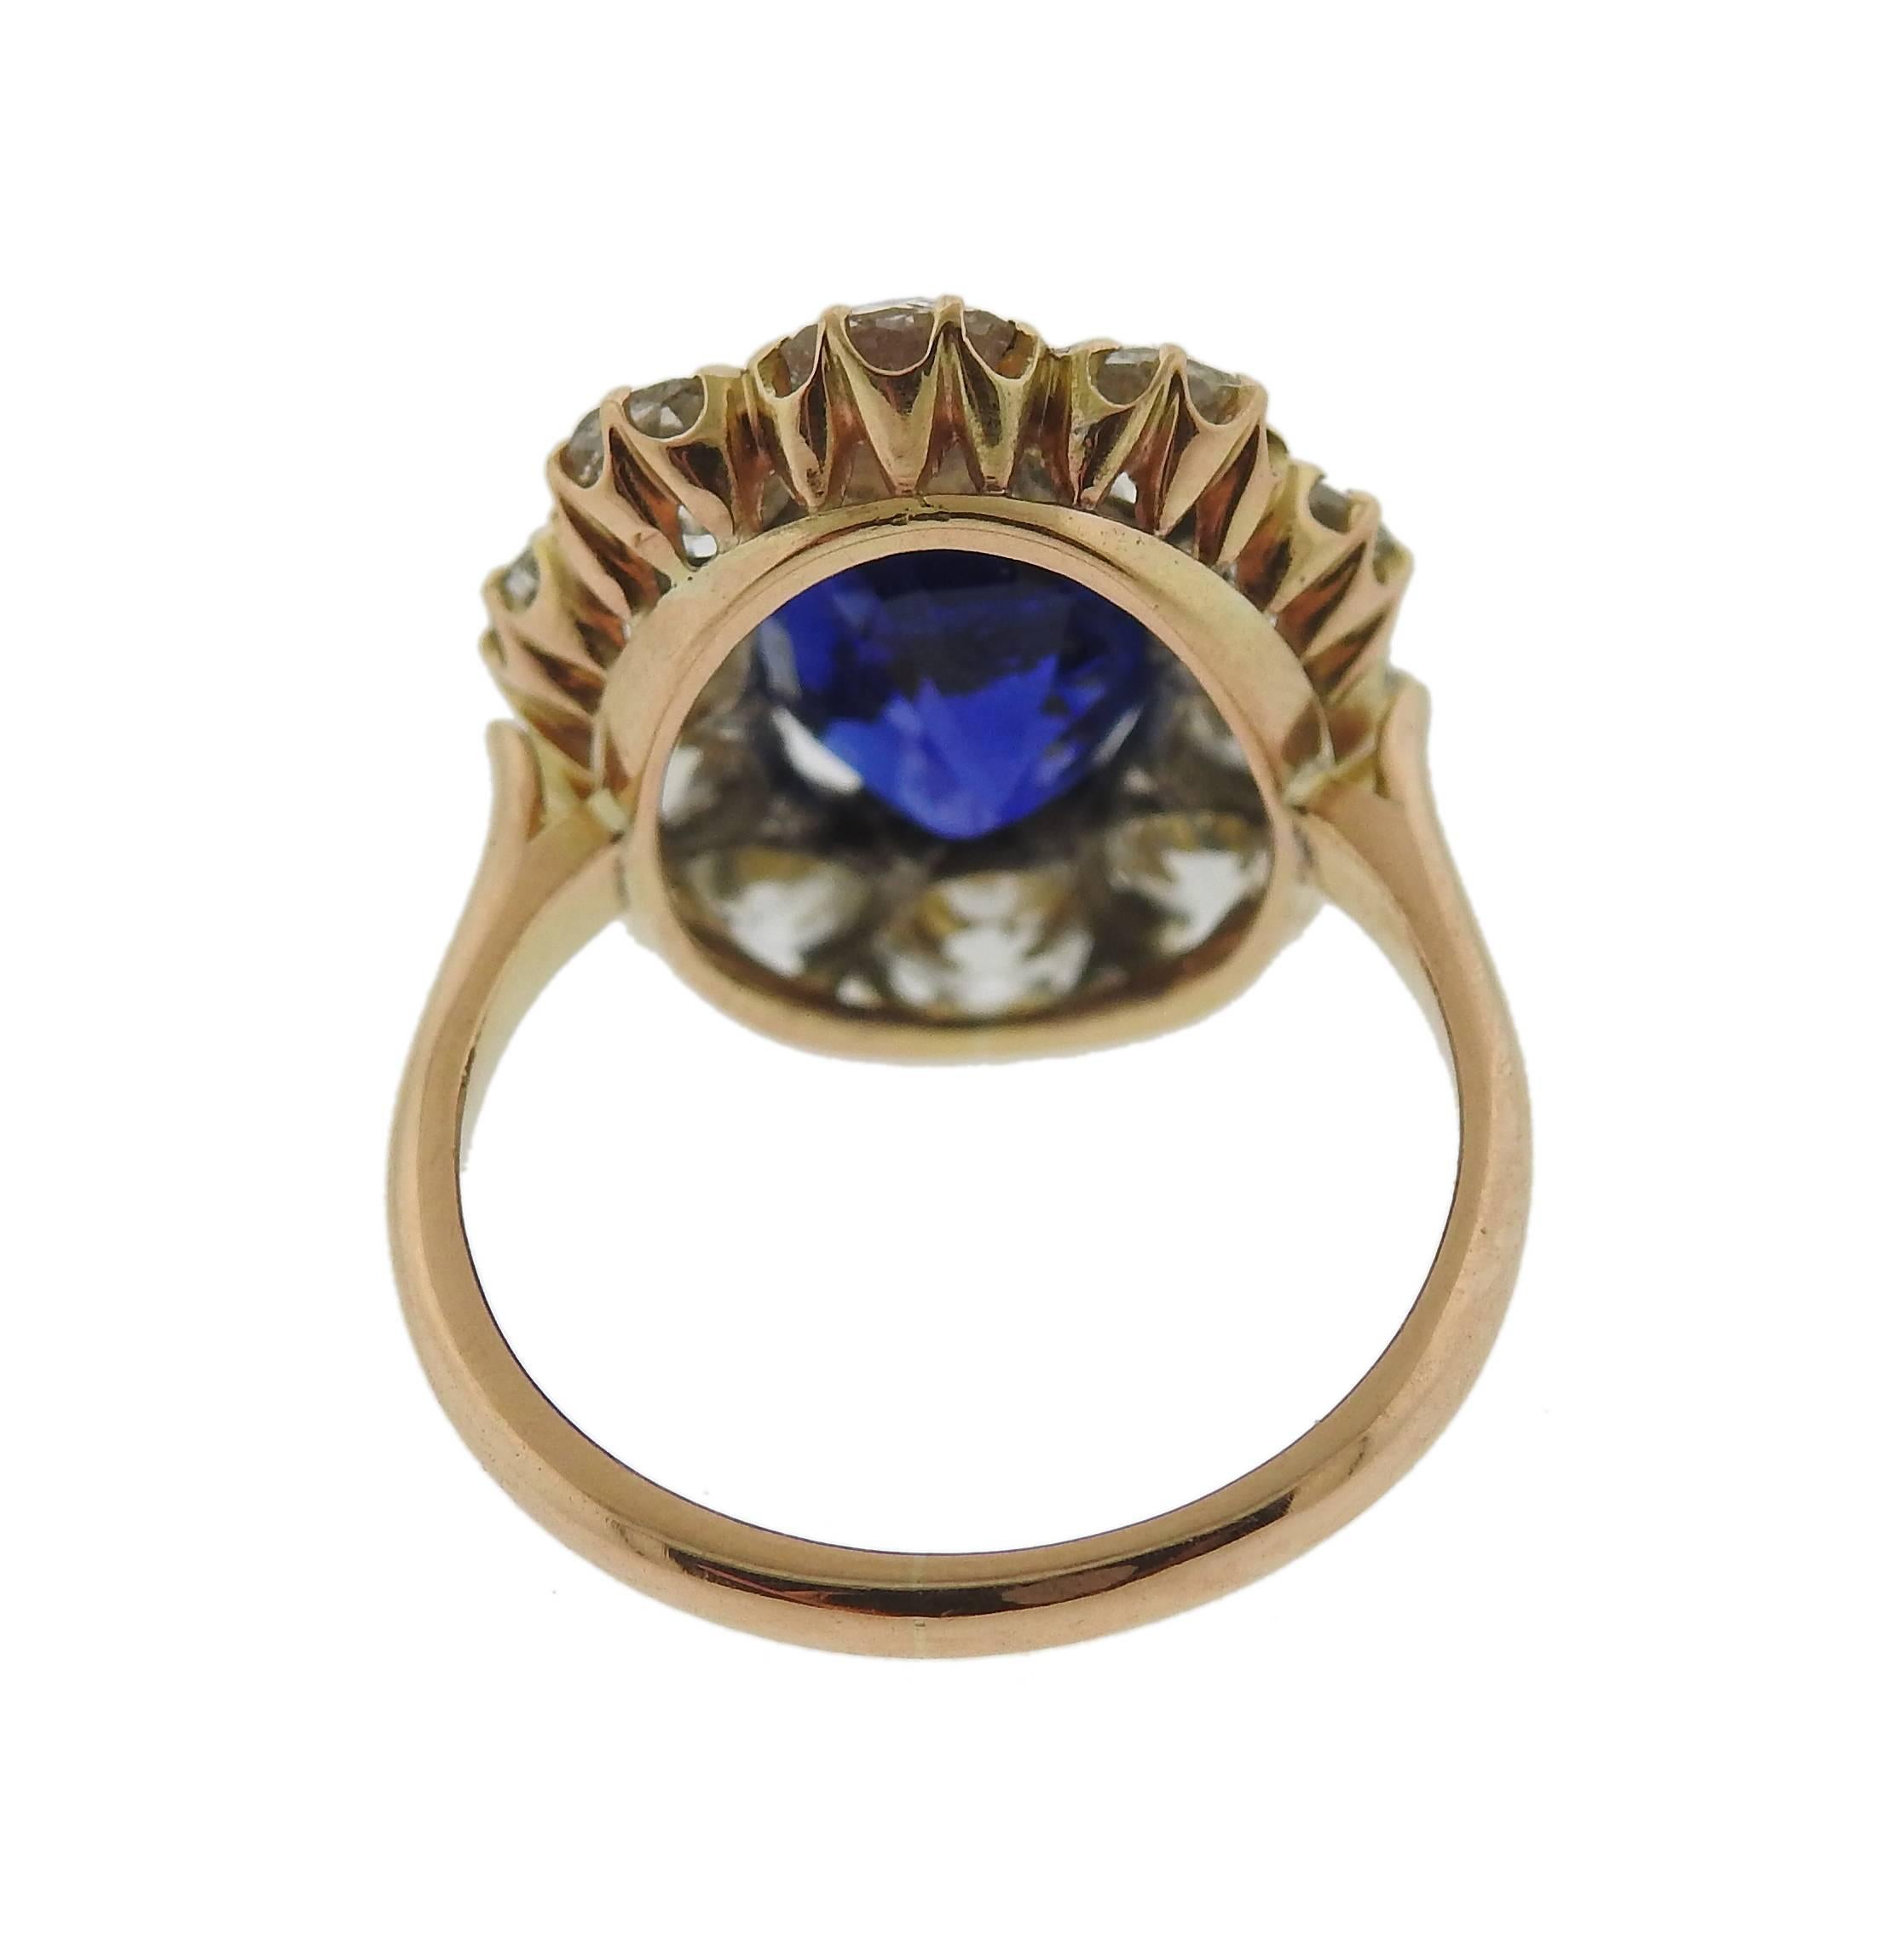 18k gold ring, featuring an impressive 4.41ct natural Burma oval sapphire, certified by AGL, sapphire measures 10.97mm x 7.79mm x 6.05mm , with no gemological evidence of heat;  surrounded with approximately 3 carats in old mine cut diamonds. Ring